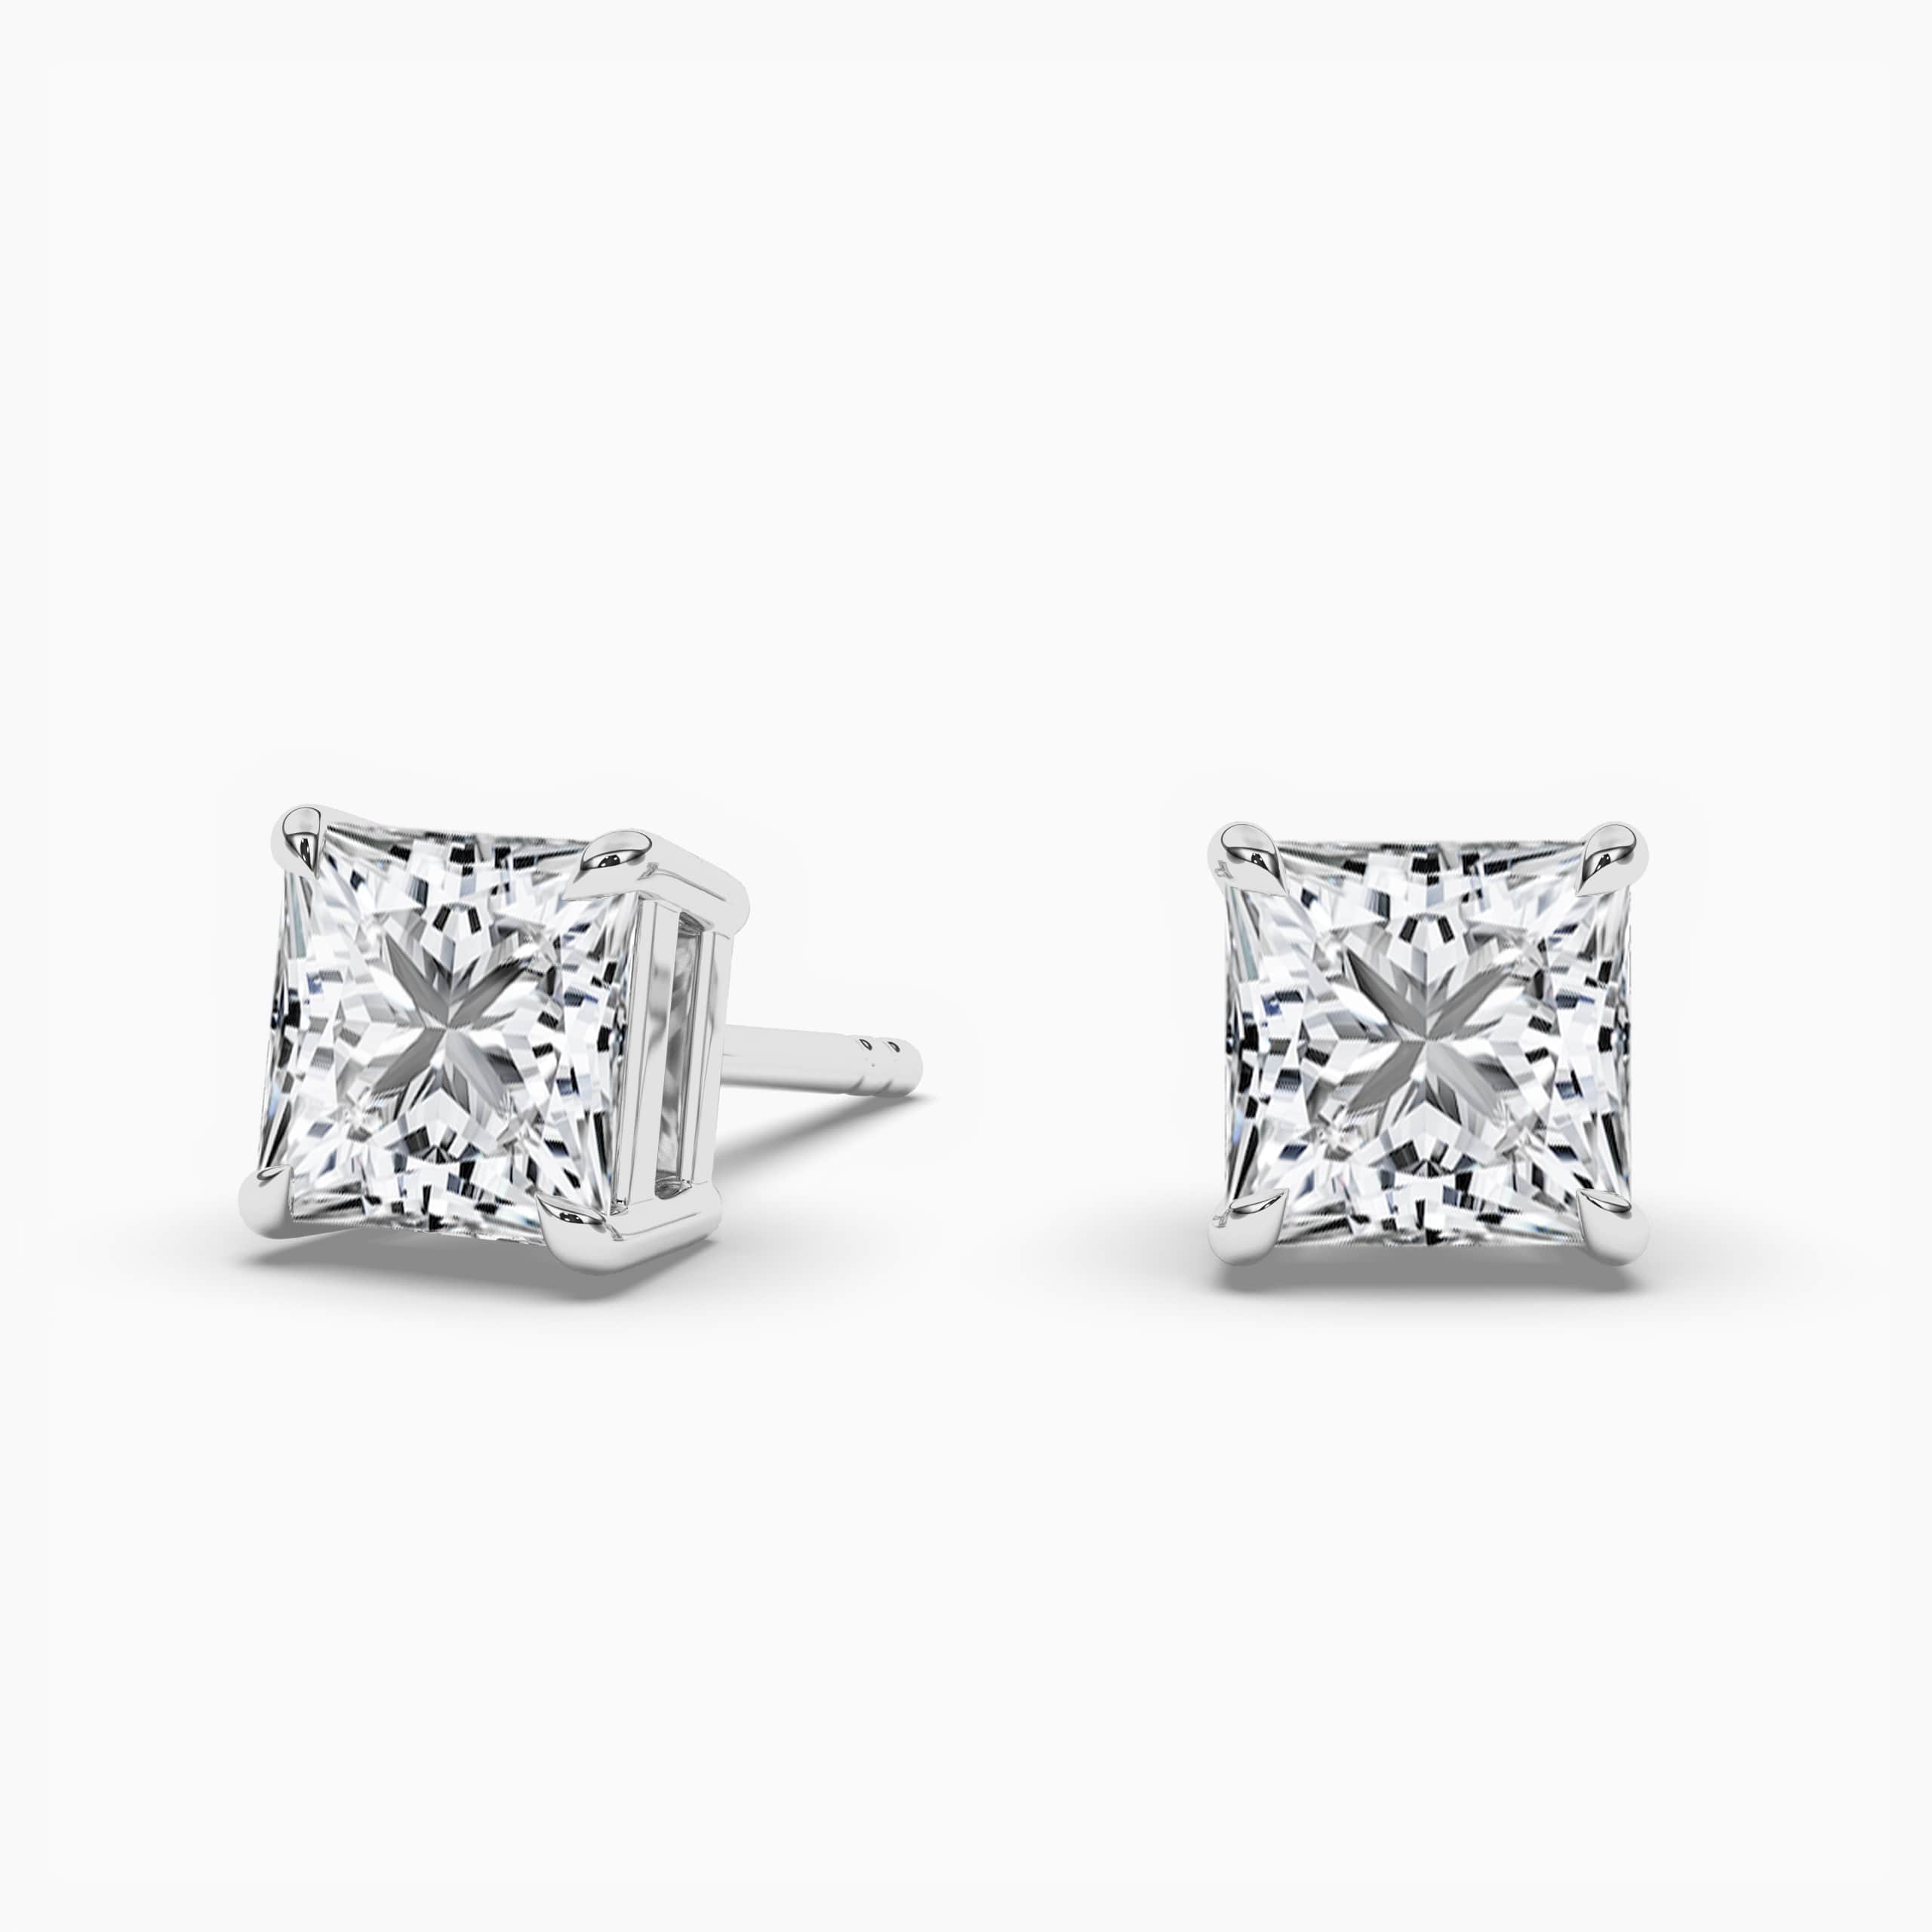 Princess-Cut Diamond Solitaire Stud Earrings in White Gold